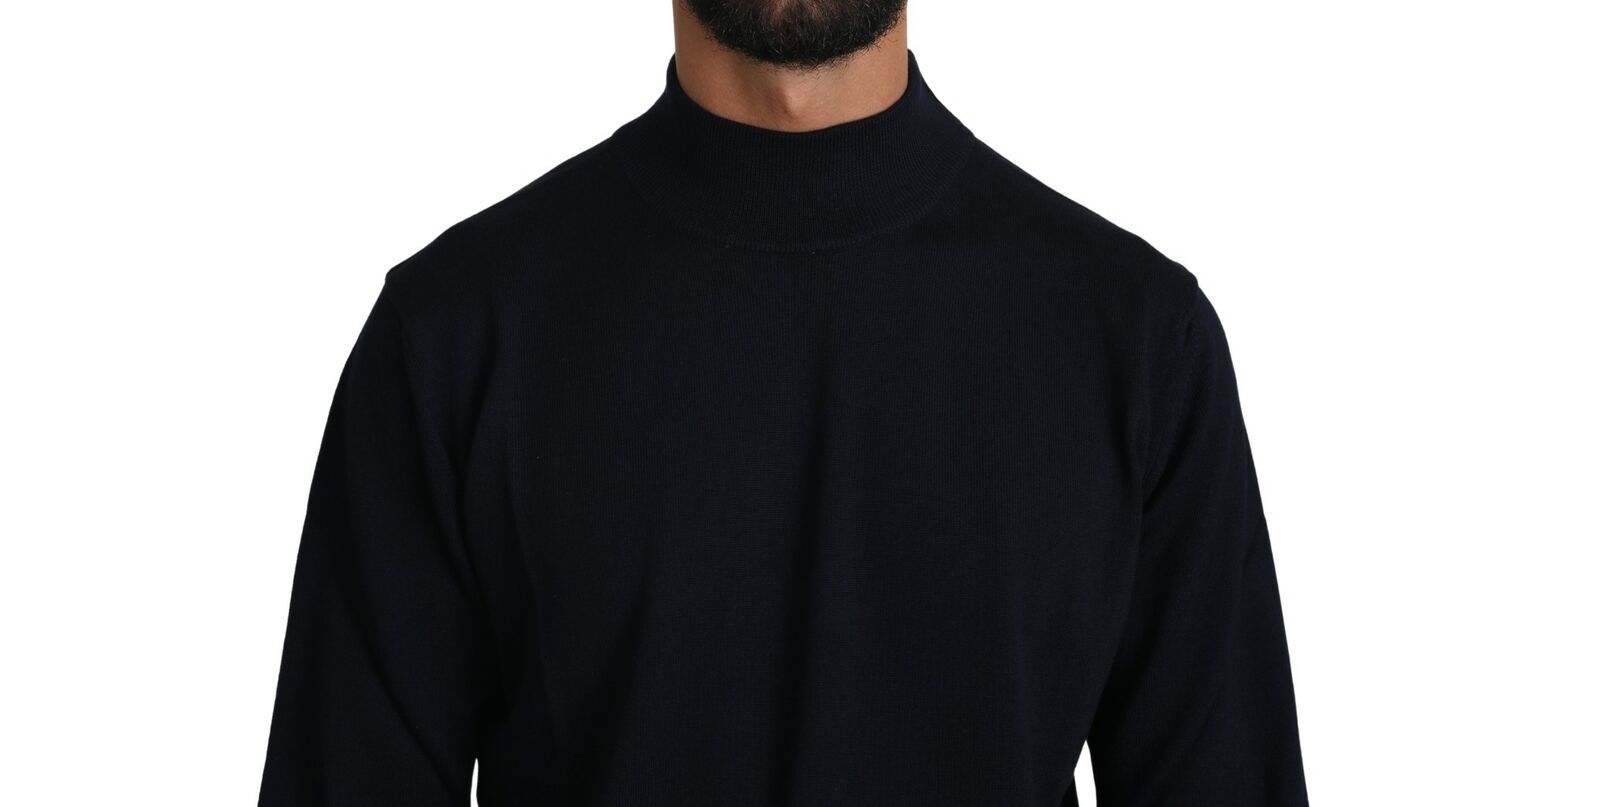 Dark Blue Crewneck Pullover 100% Wool Sweater - Designed by MILA SCHÖN Available to Buy at a Discounted Price on Moon Behind The Hill Online Designer Discount Store